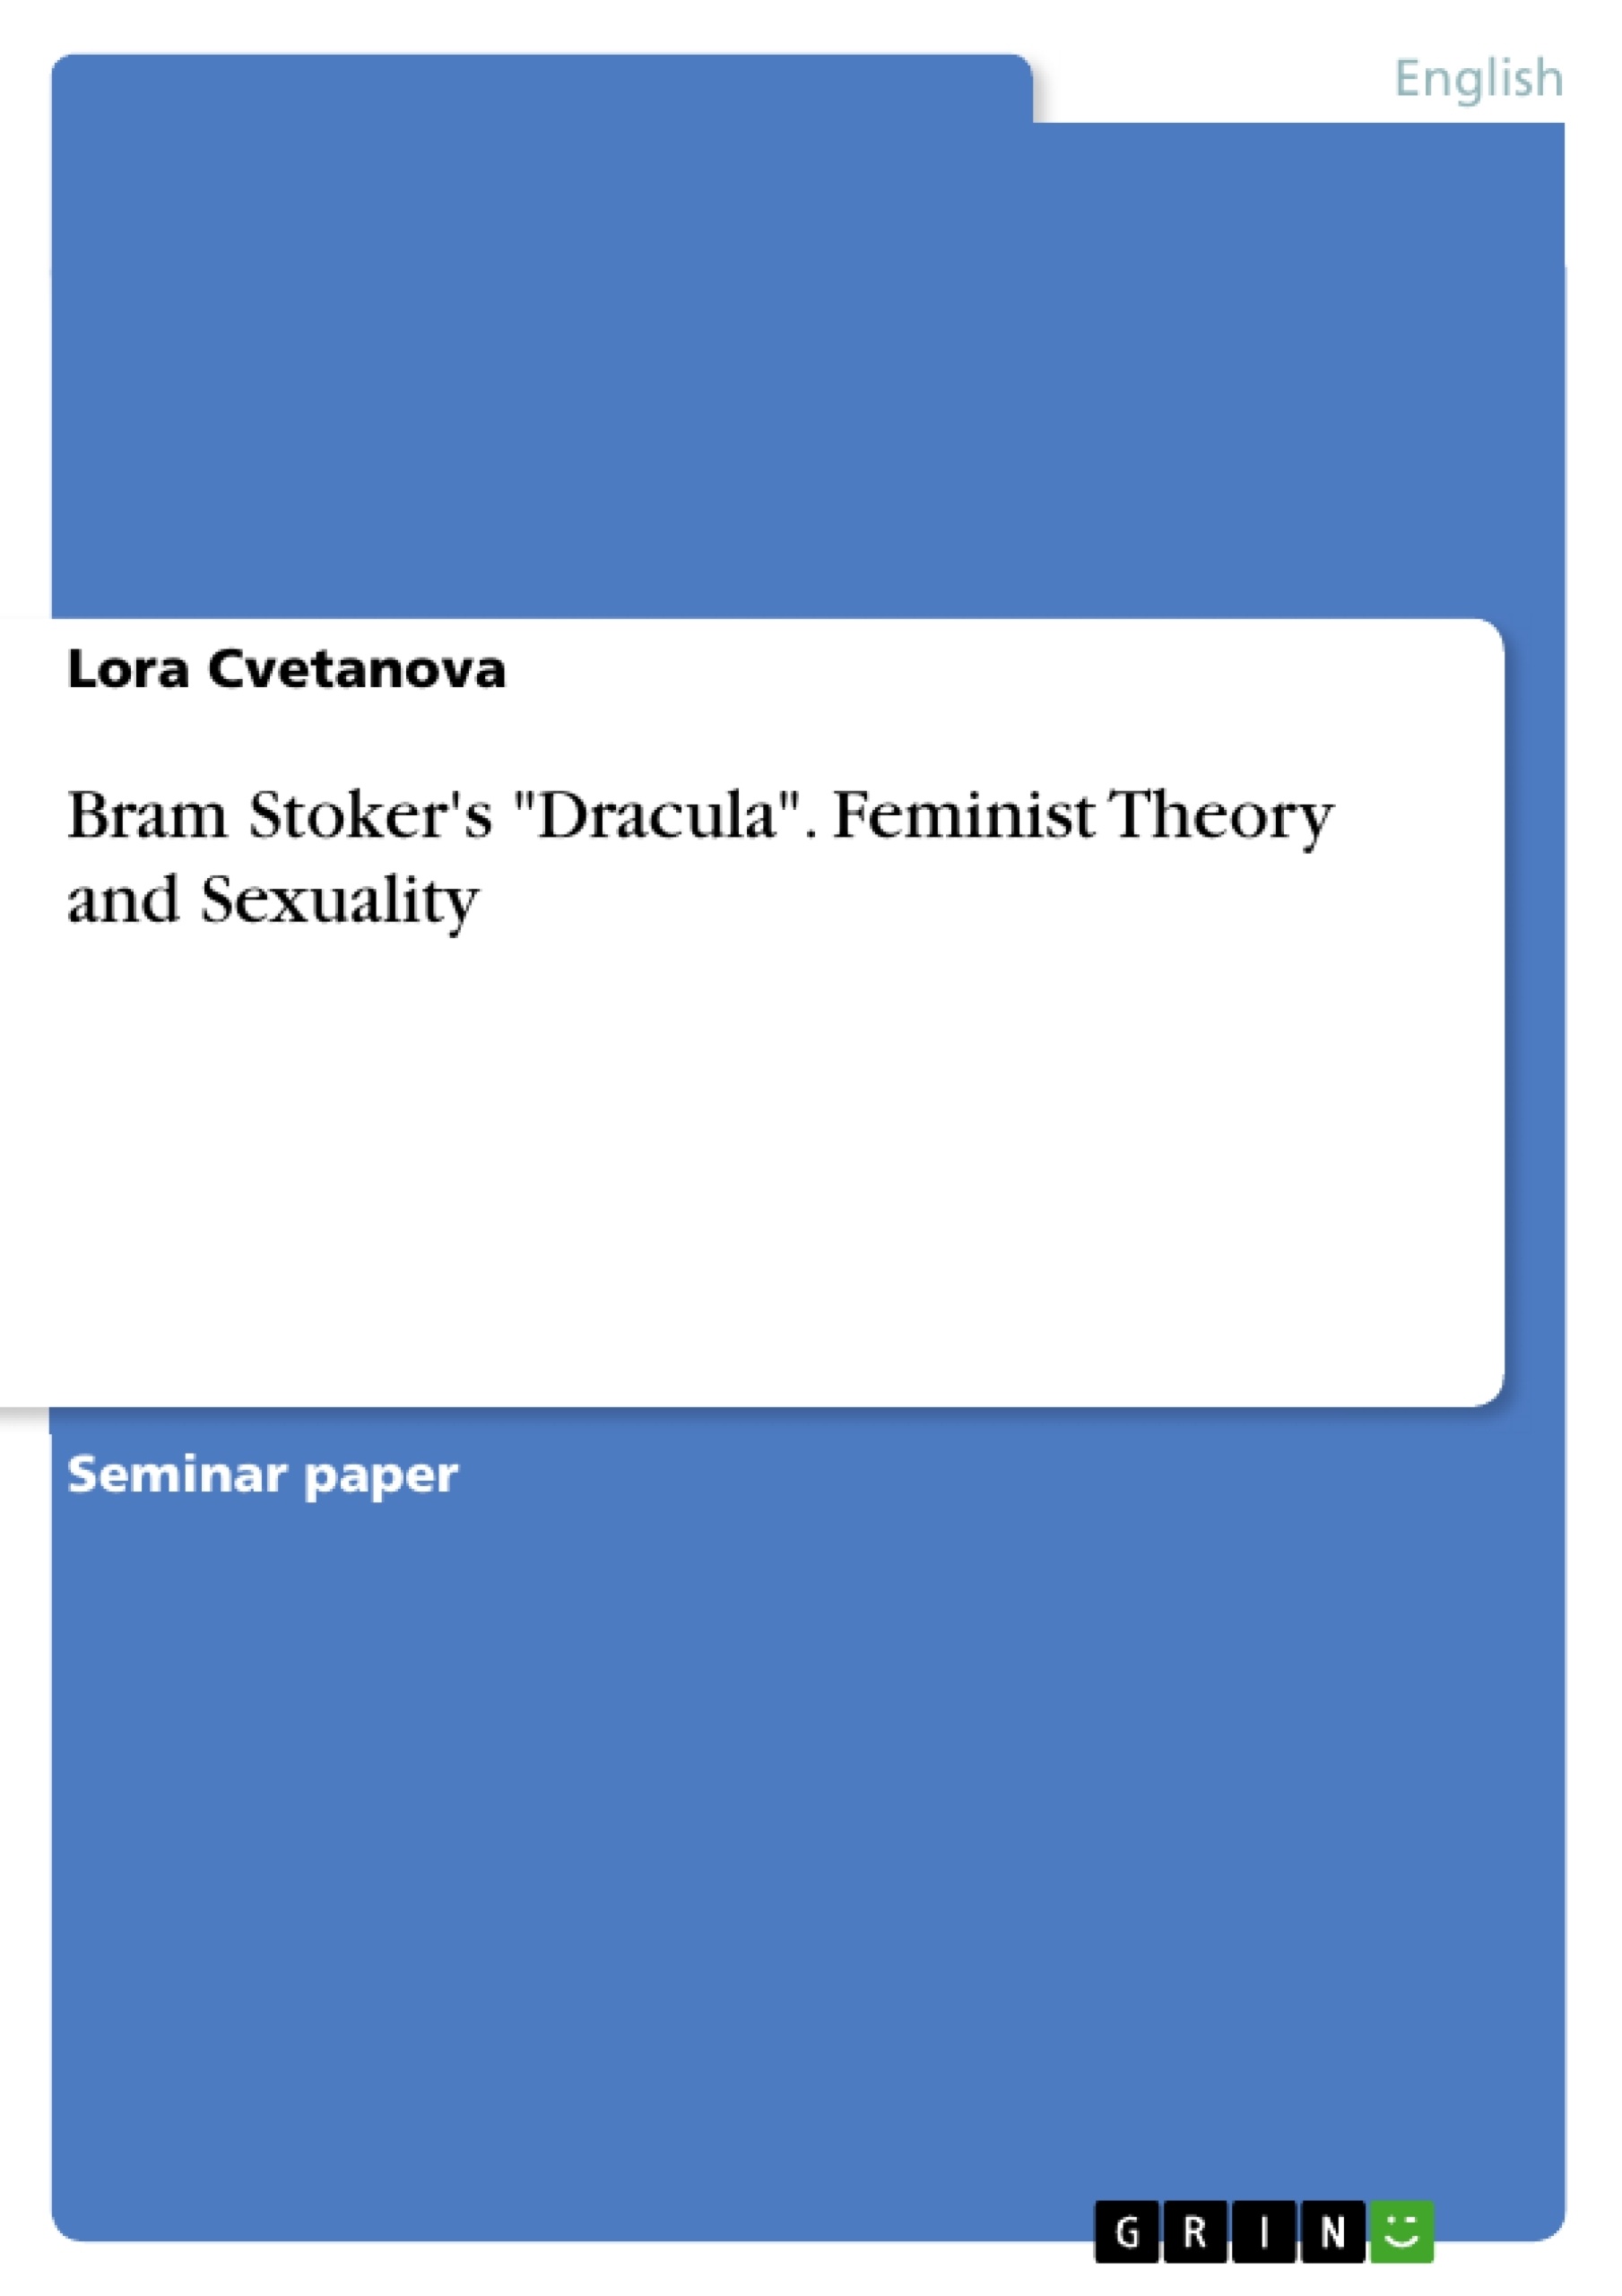 Título: Bram Stoker's "Dracula". Feminist Theory and Sexuality